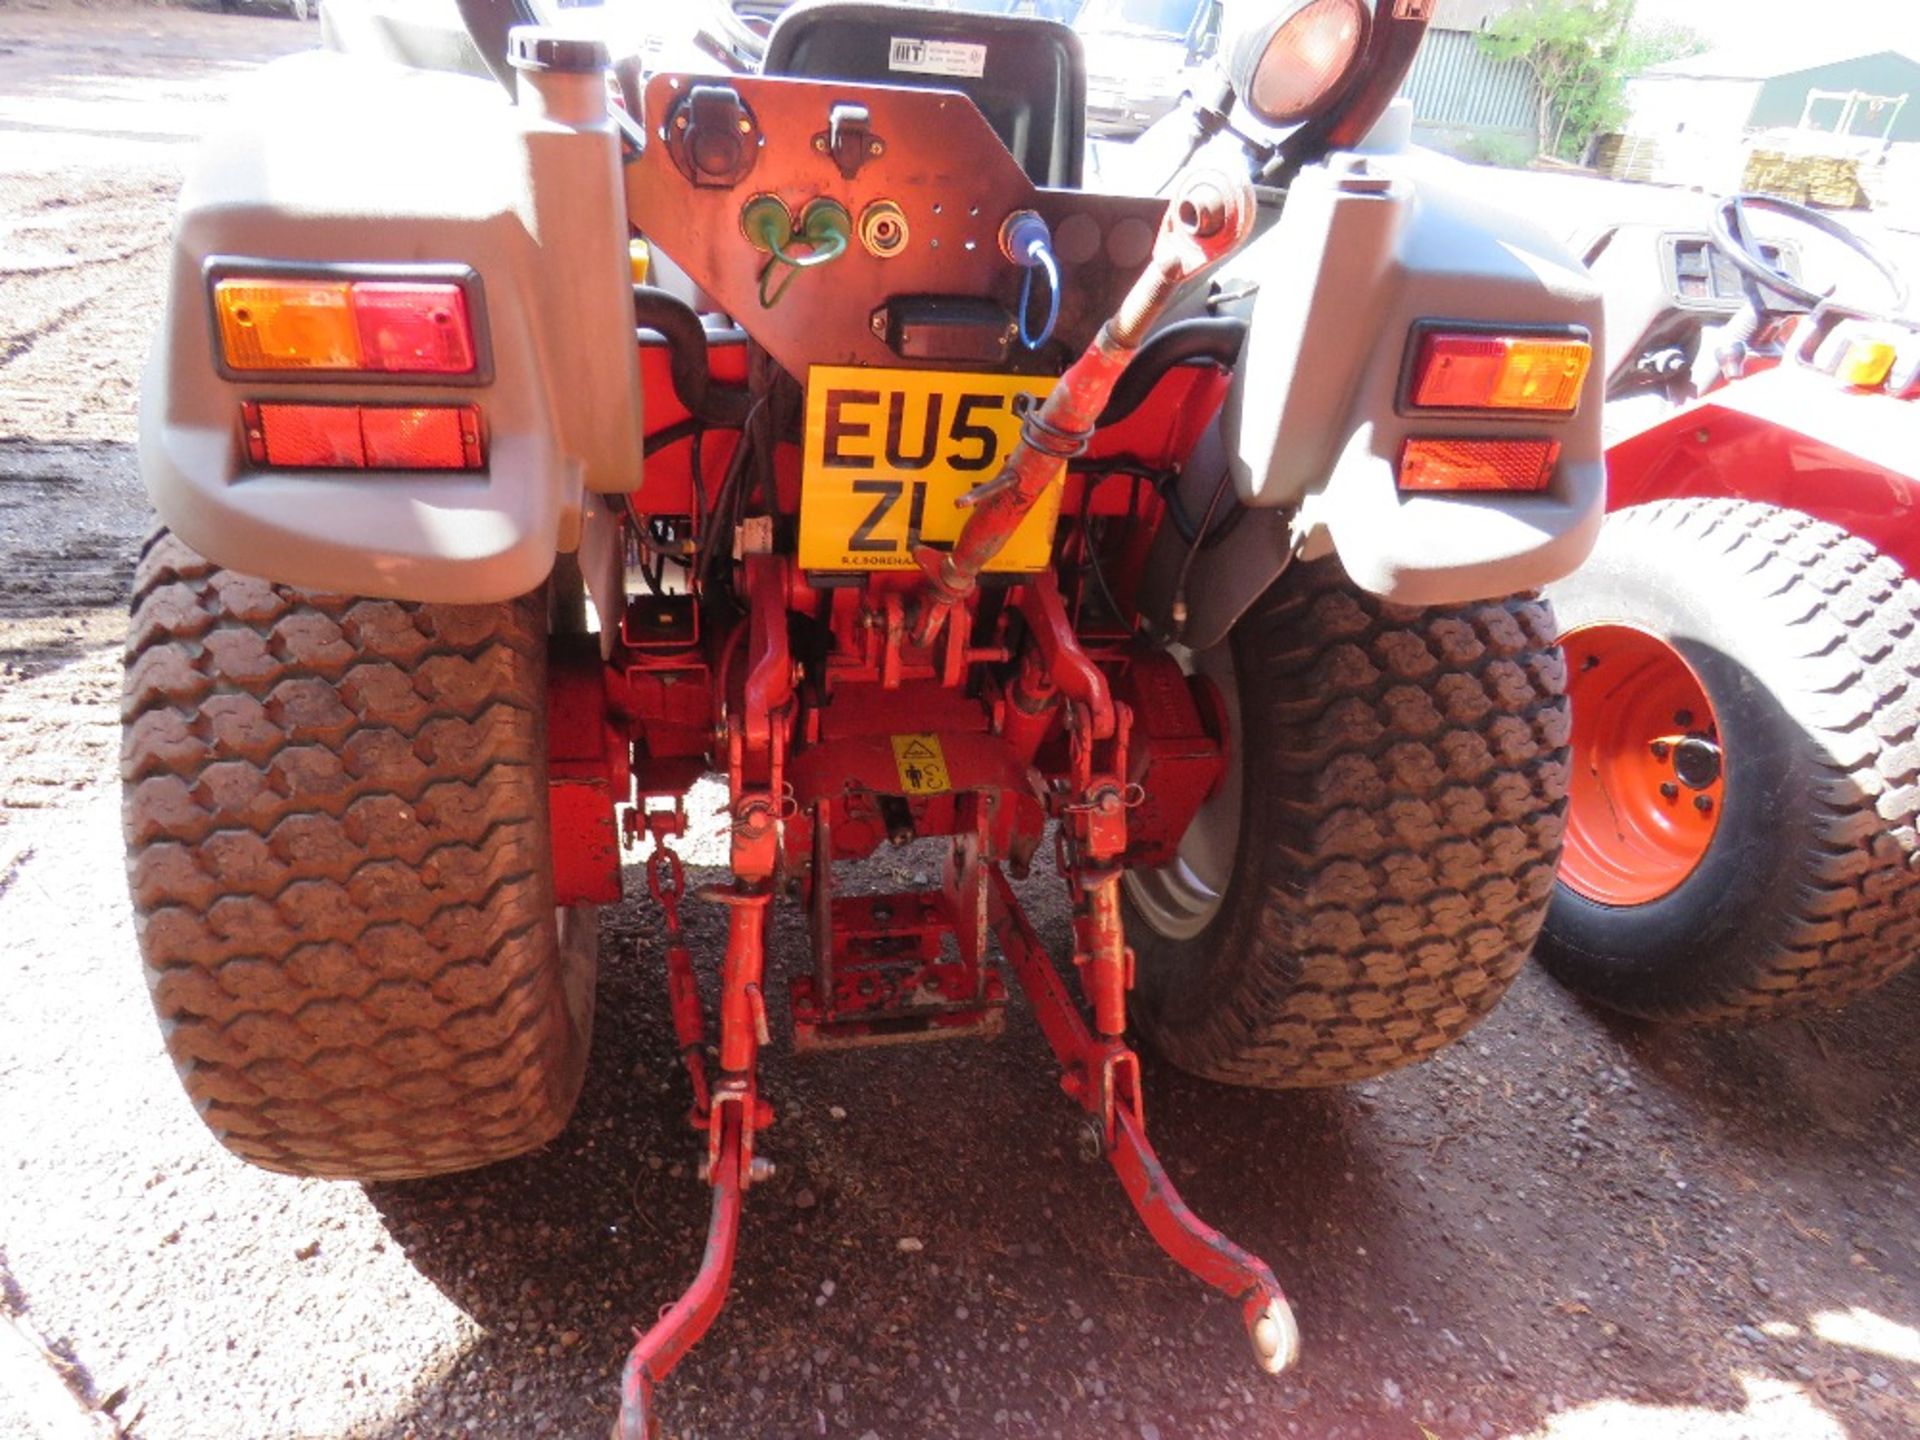 MCCORMICK GX45H 4WD TRACTOR ON GRASS TYRES. 545 REC HOURS. REG:EU53 ZLV WITH V5. HYDROSTATIC DRIVE. - Image 2 of 6